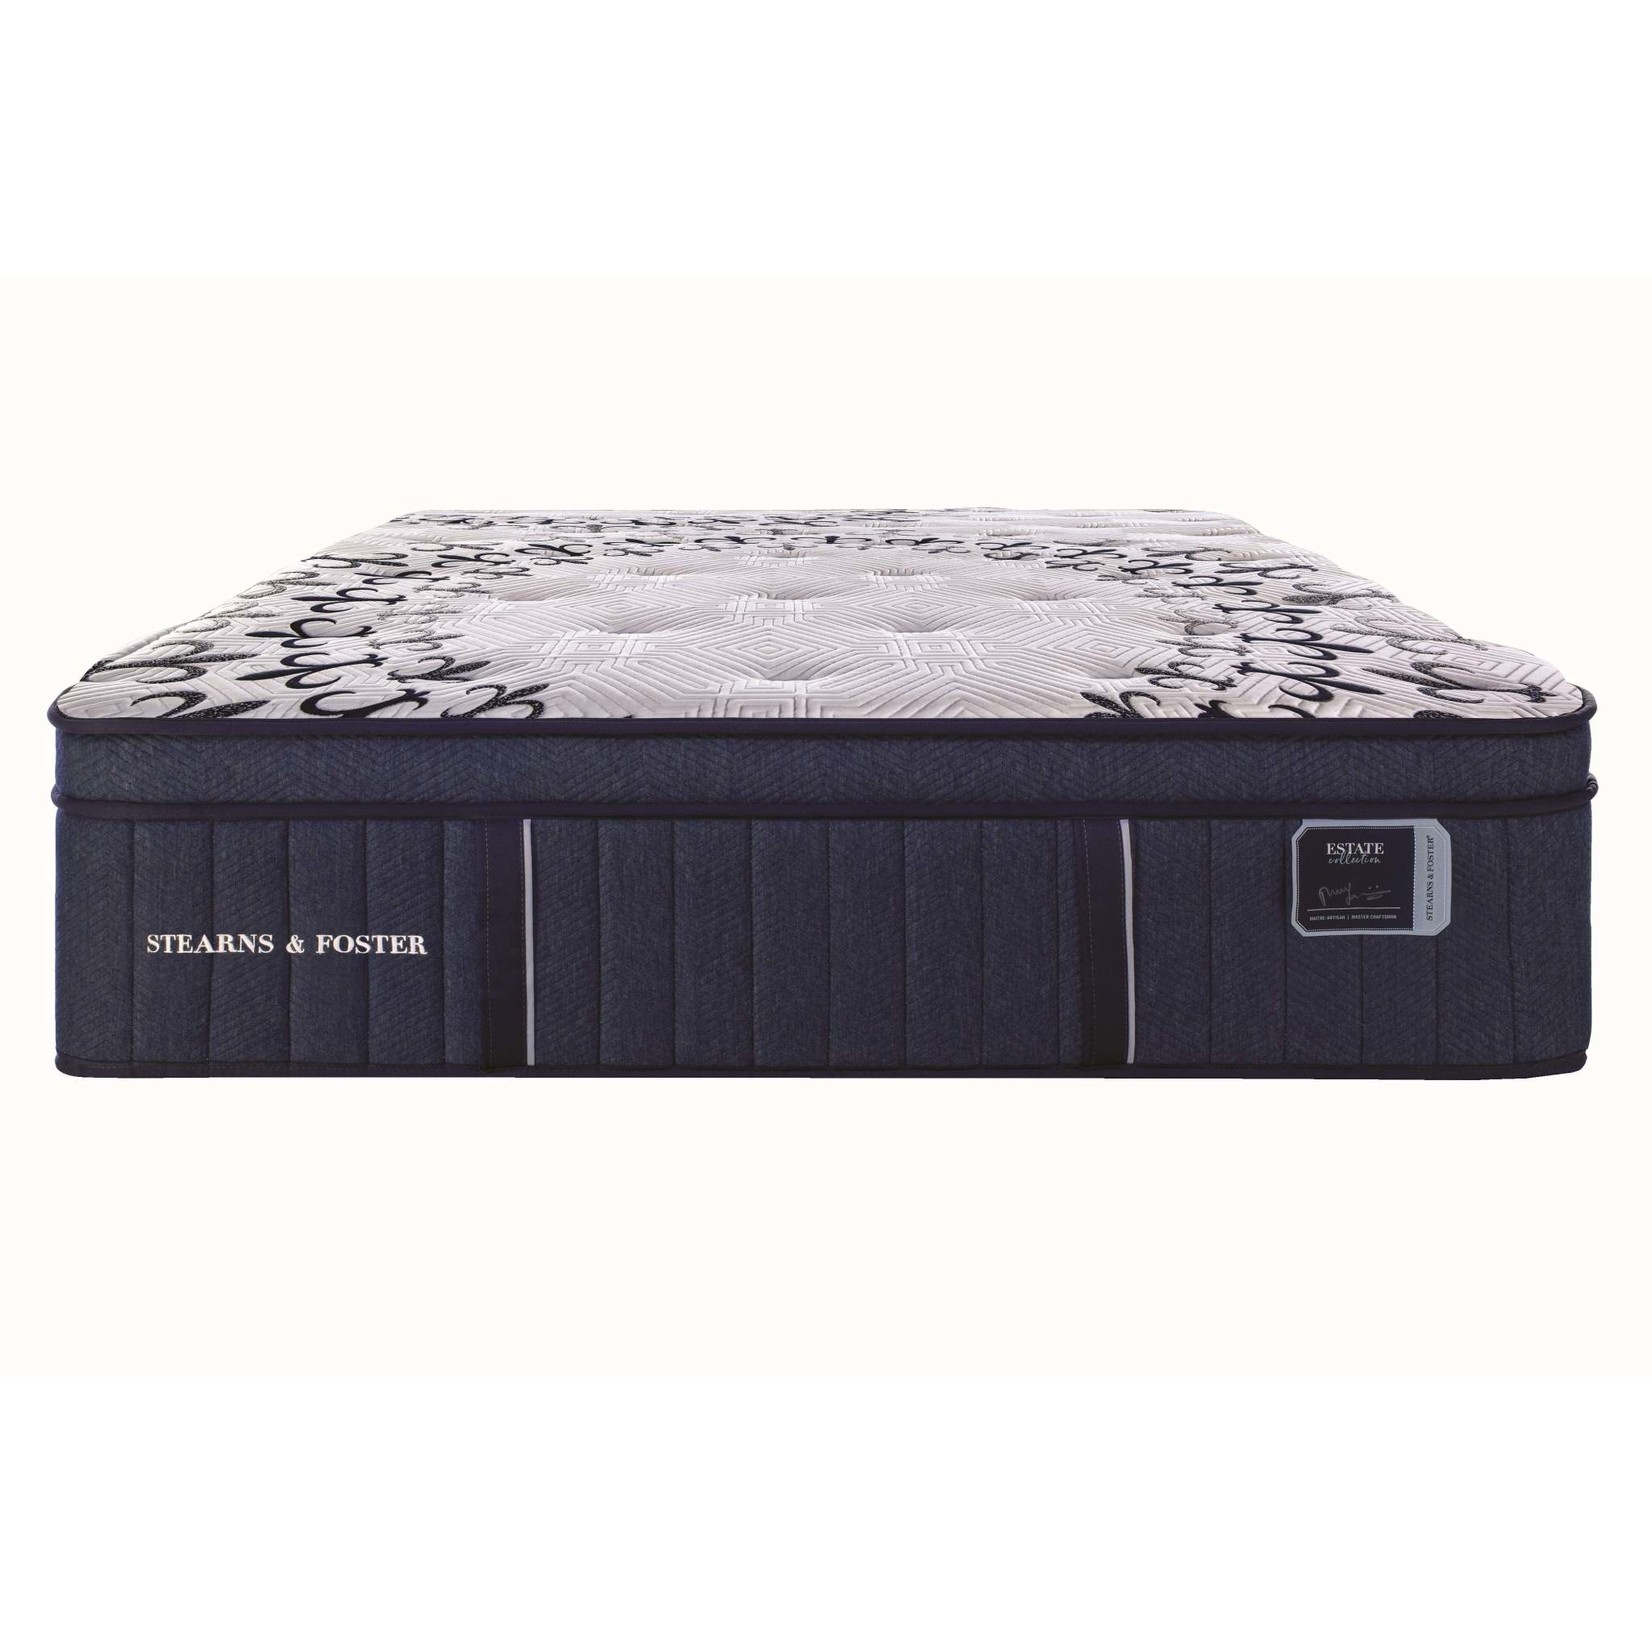 STEARNS AND FOSTER MON AMOUR LXPET S&F  MATTRESS